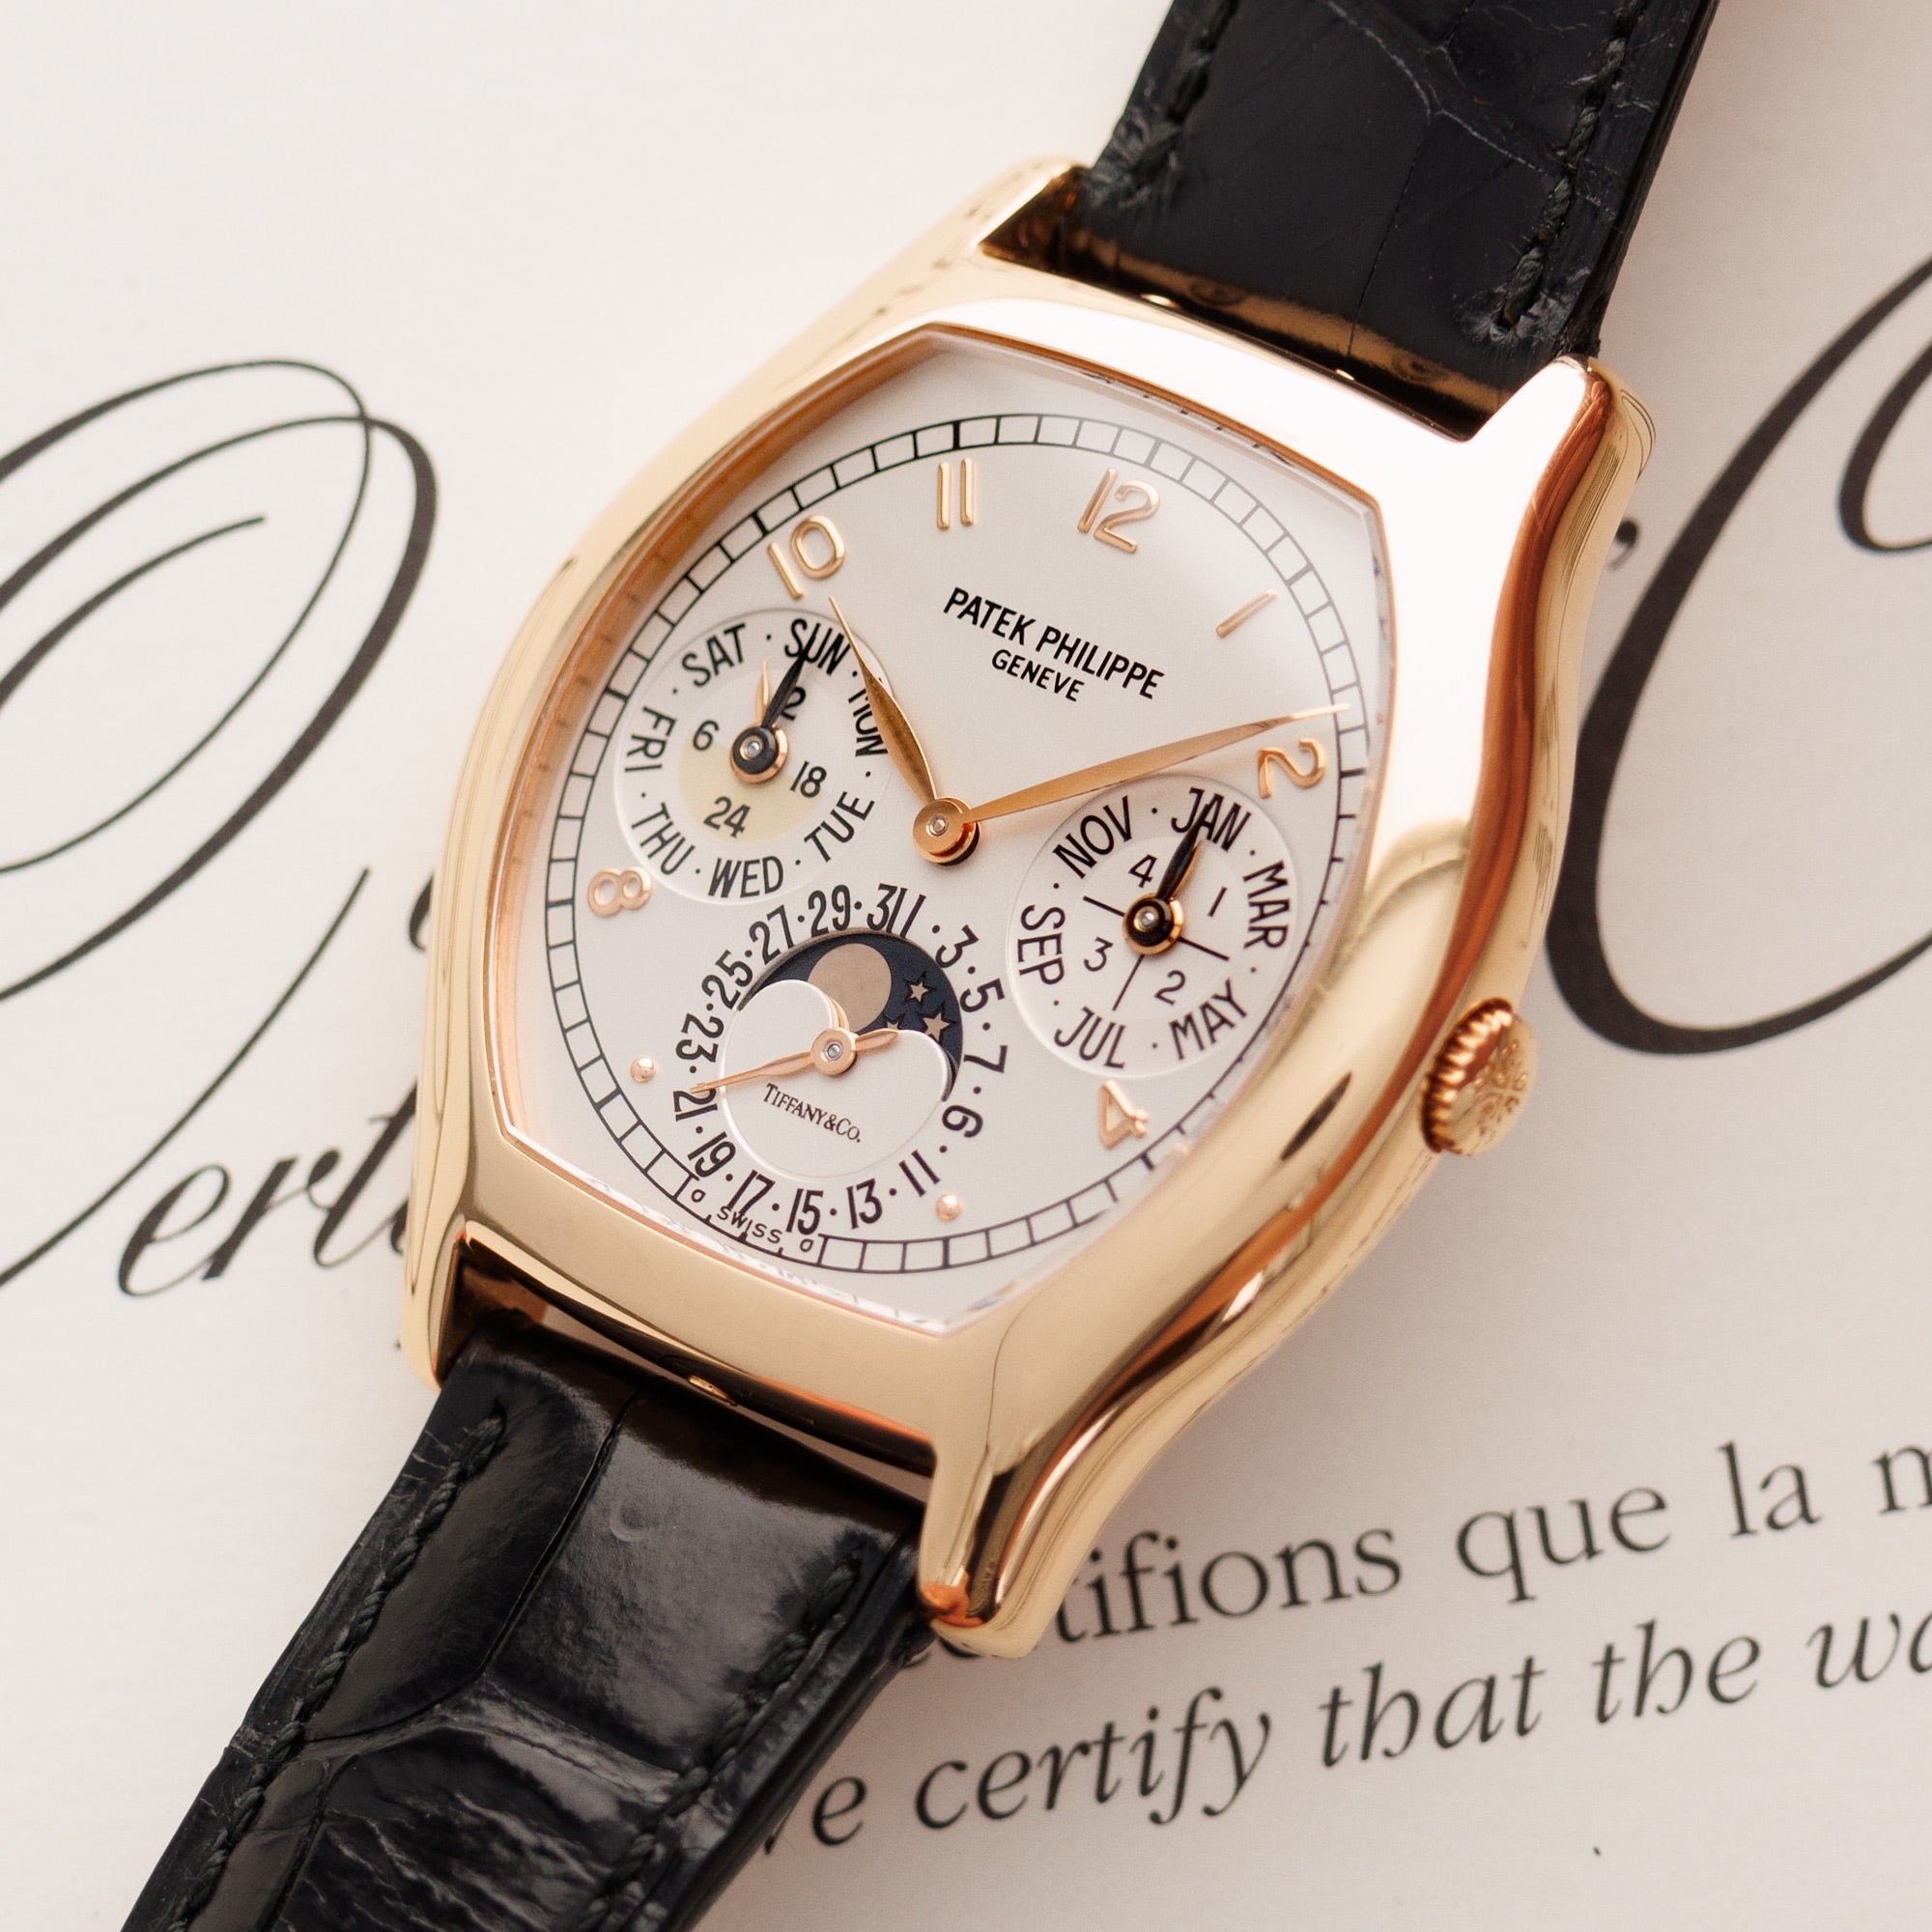 Patek Philippe - Patek Philippe Rose Gold Perpetual Calendar Ref. 5040 retailed by Tiffany &amp; Co. - The Keystone Watches